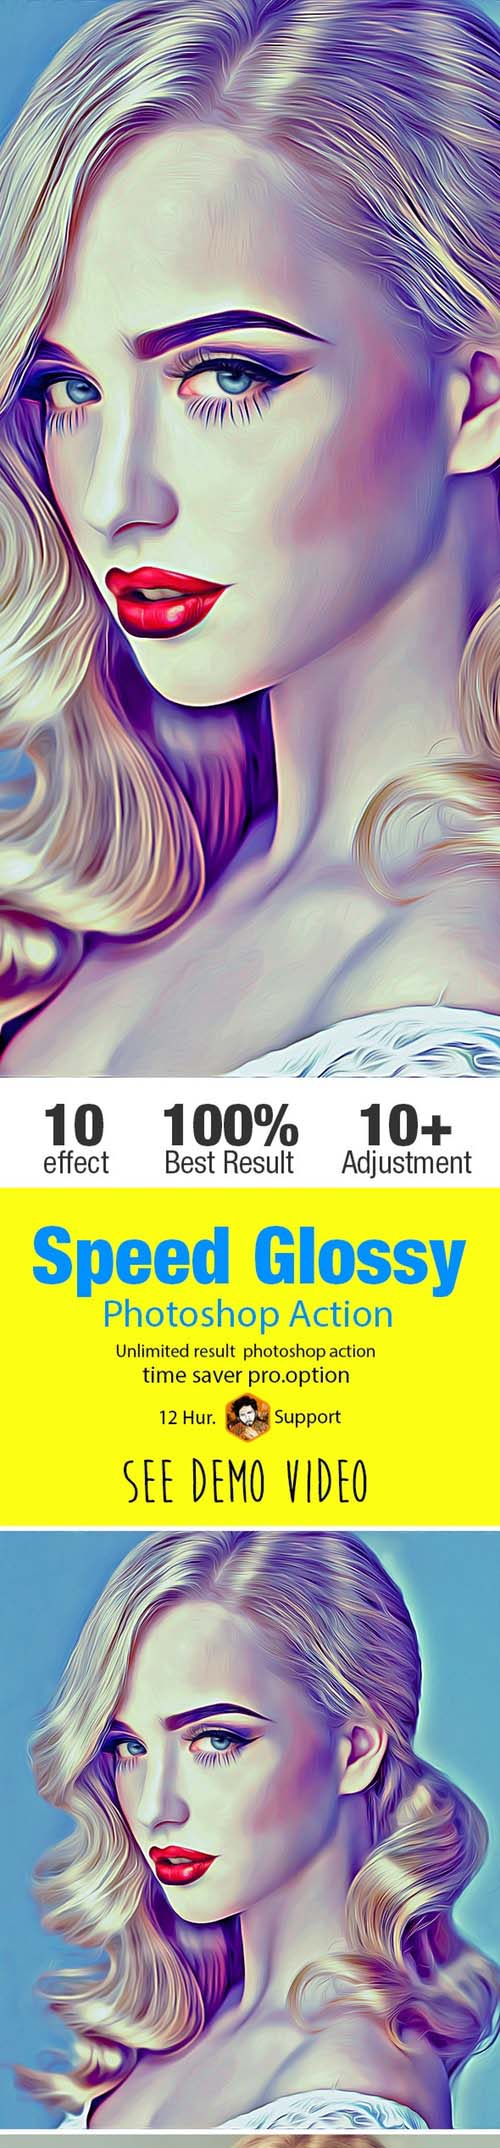 Speed Glossy Art Action